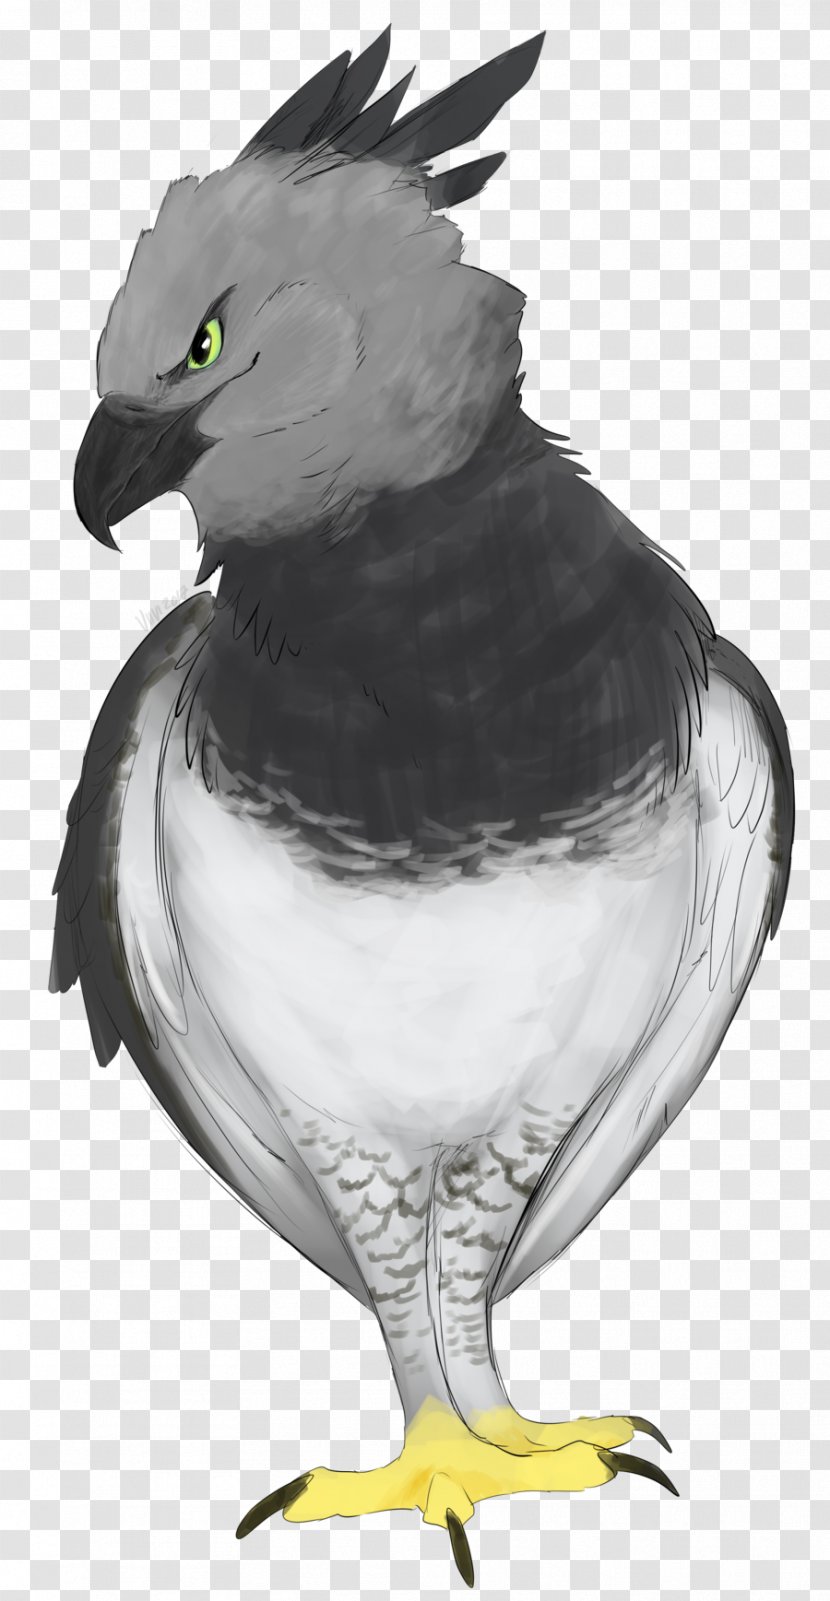 Eagle Chicken Hawk Vulture - Black And White Transparent PNG